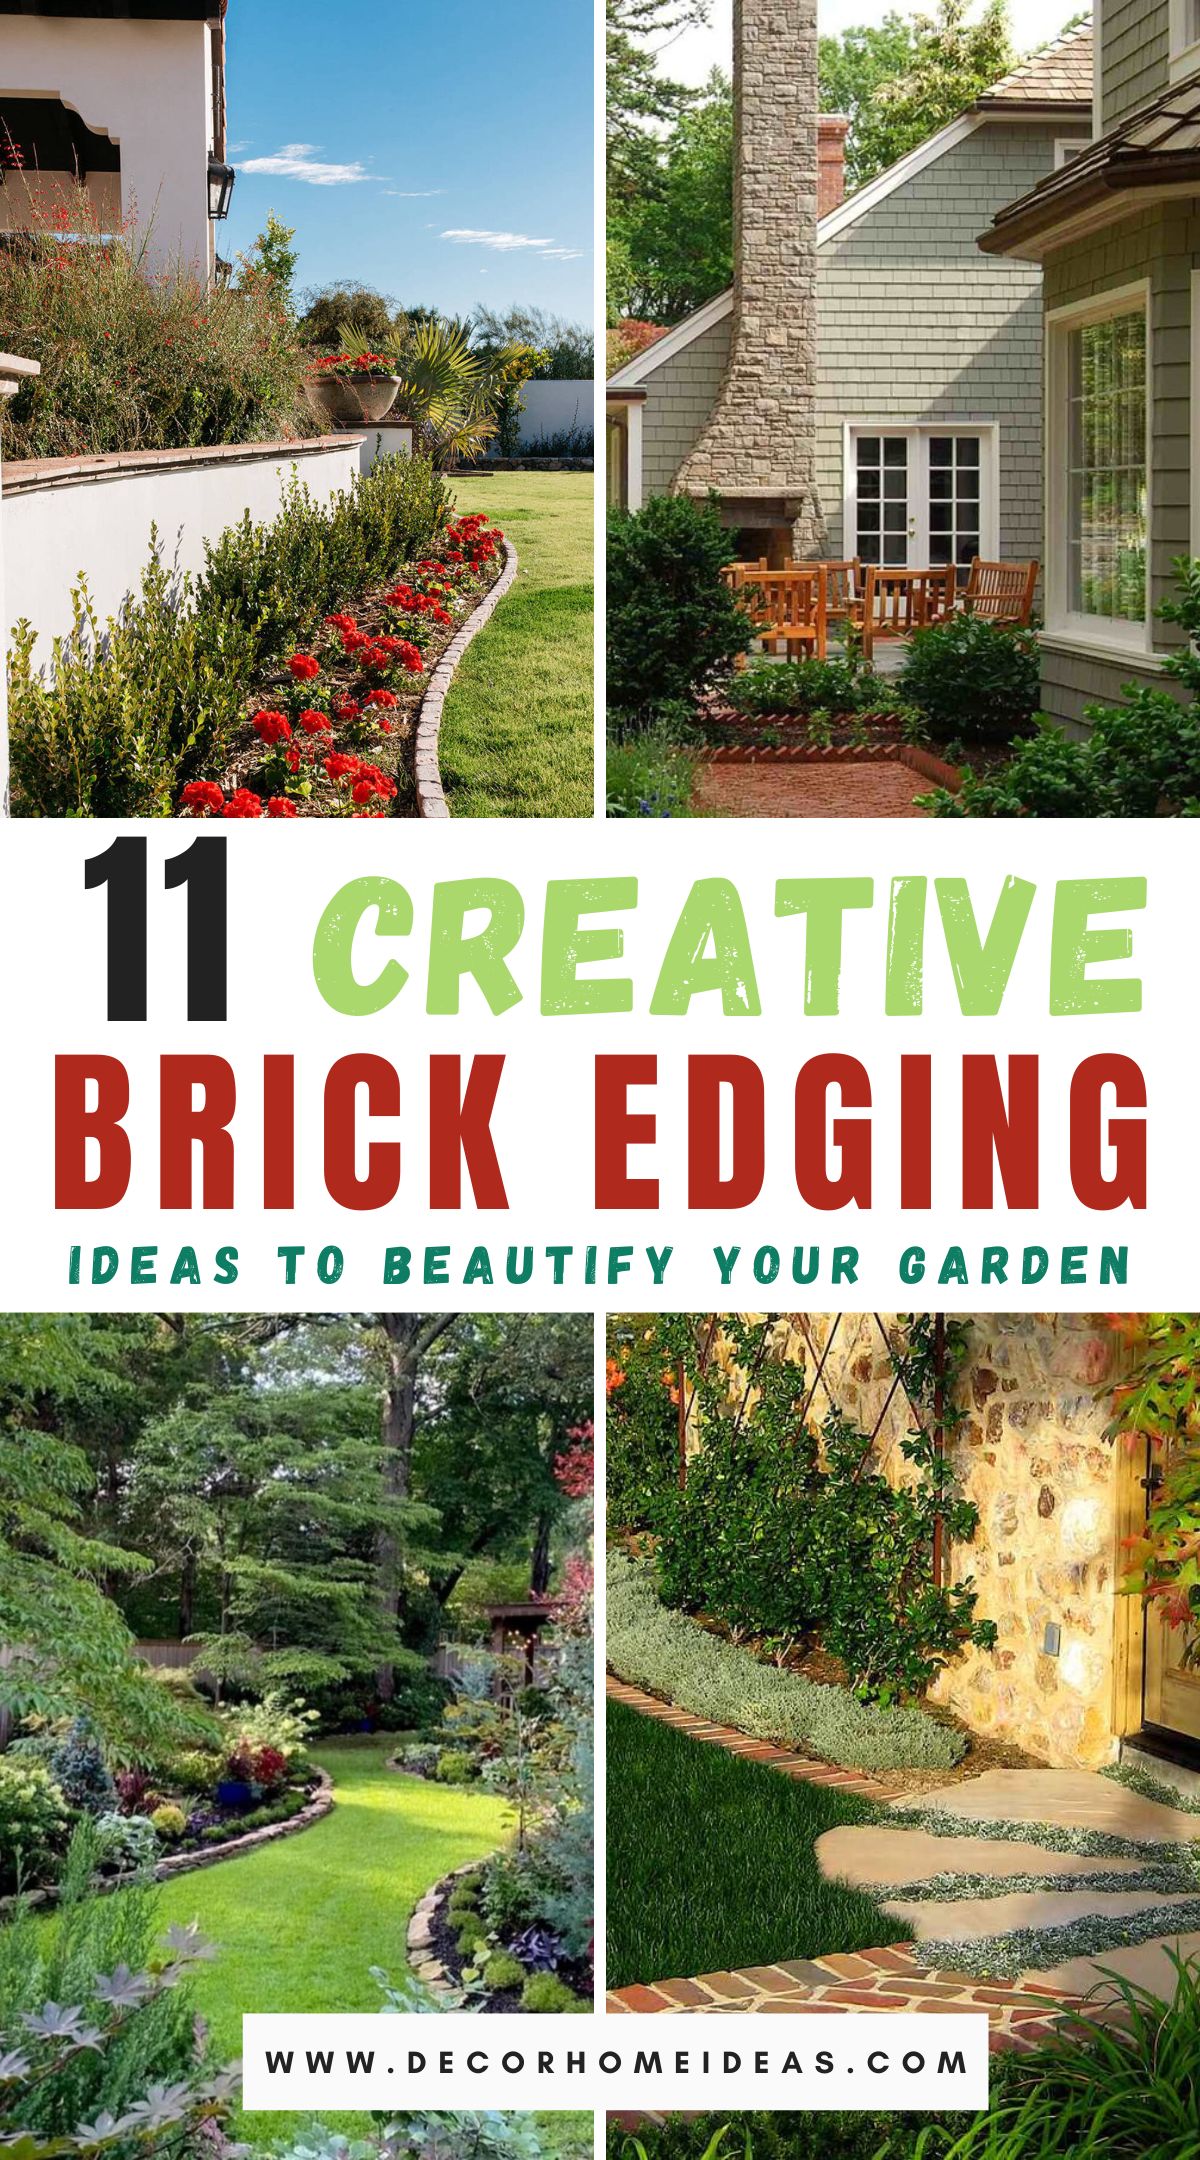 Transform your garden with these 11 stunning brick edging ideas, adding timeless charm and structure to your outdoor space. From classic straight lines to intricate patterns, discover how brick edging can elevate your garden design.